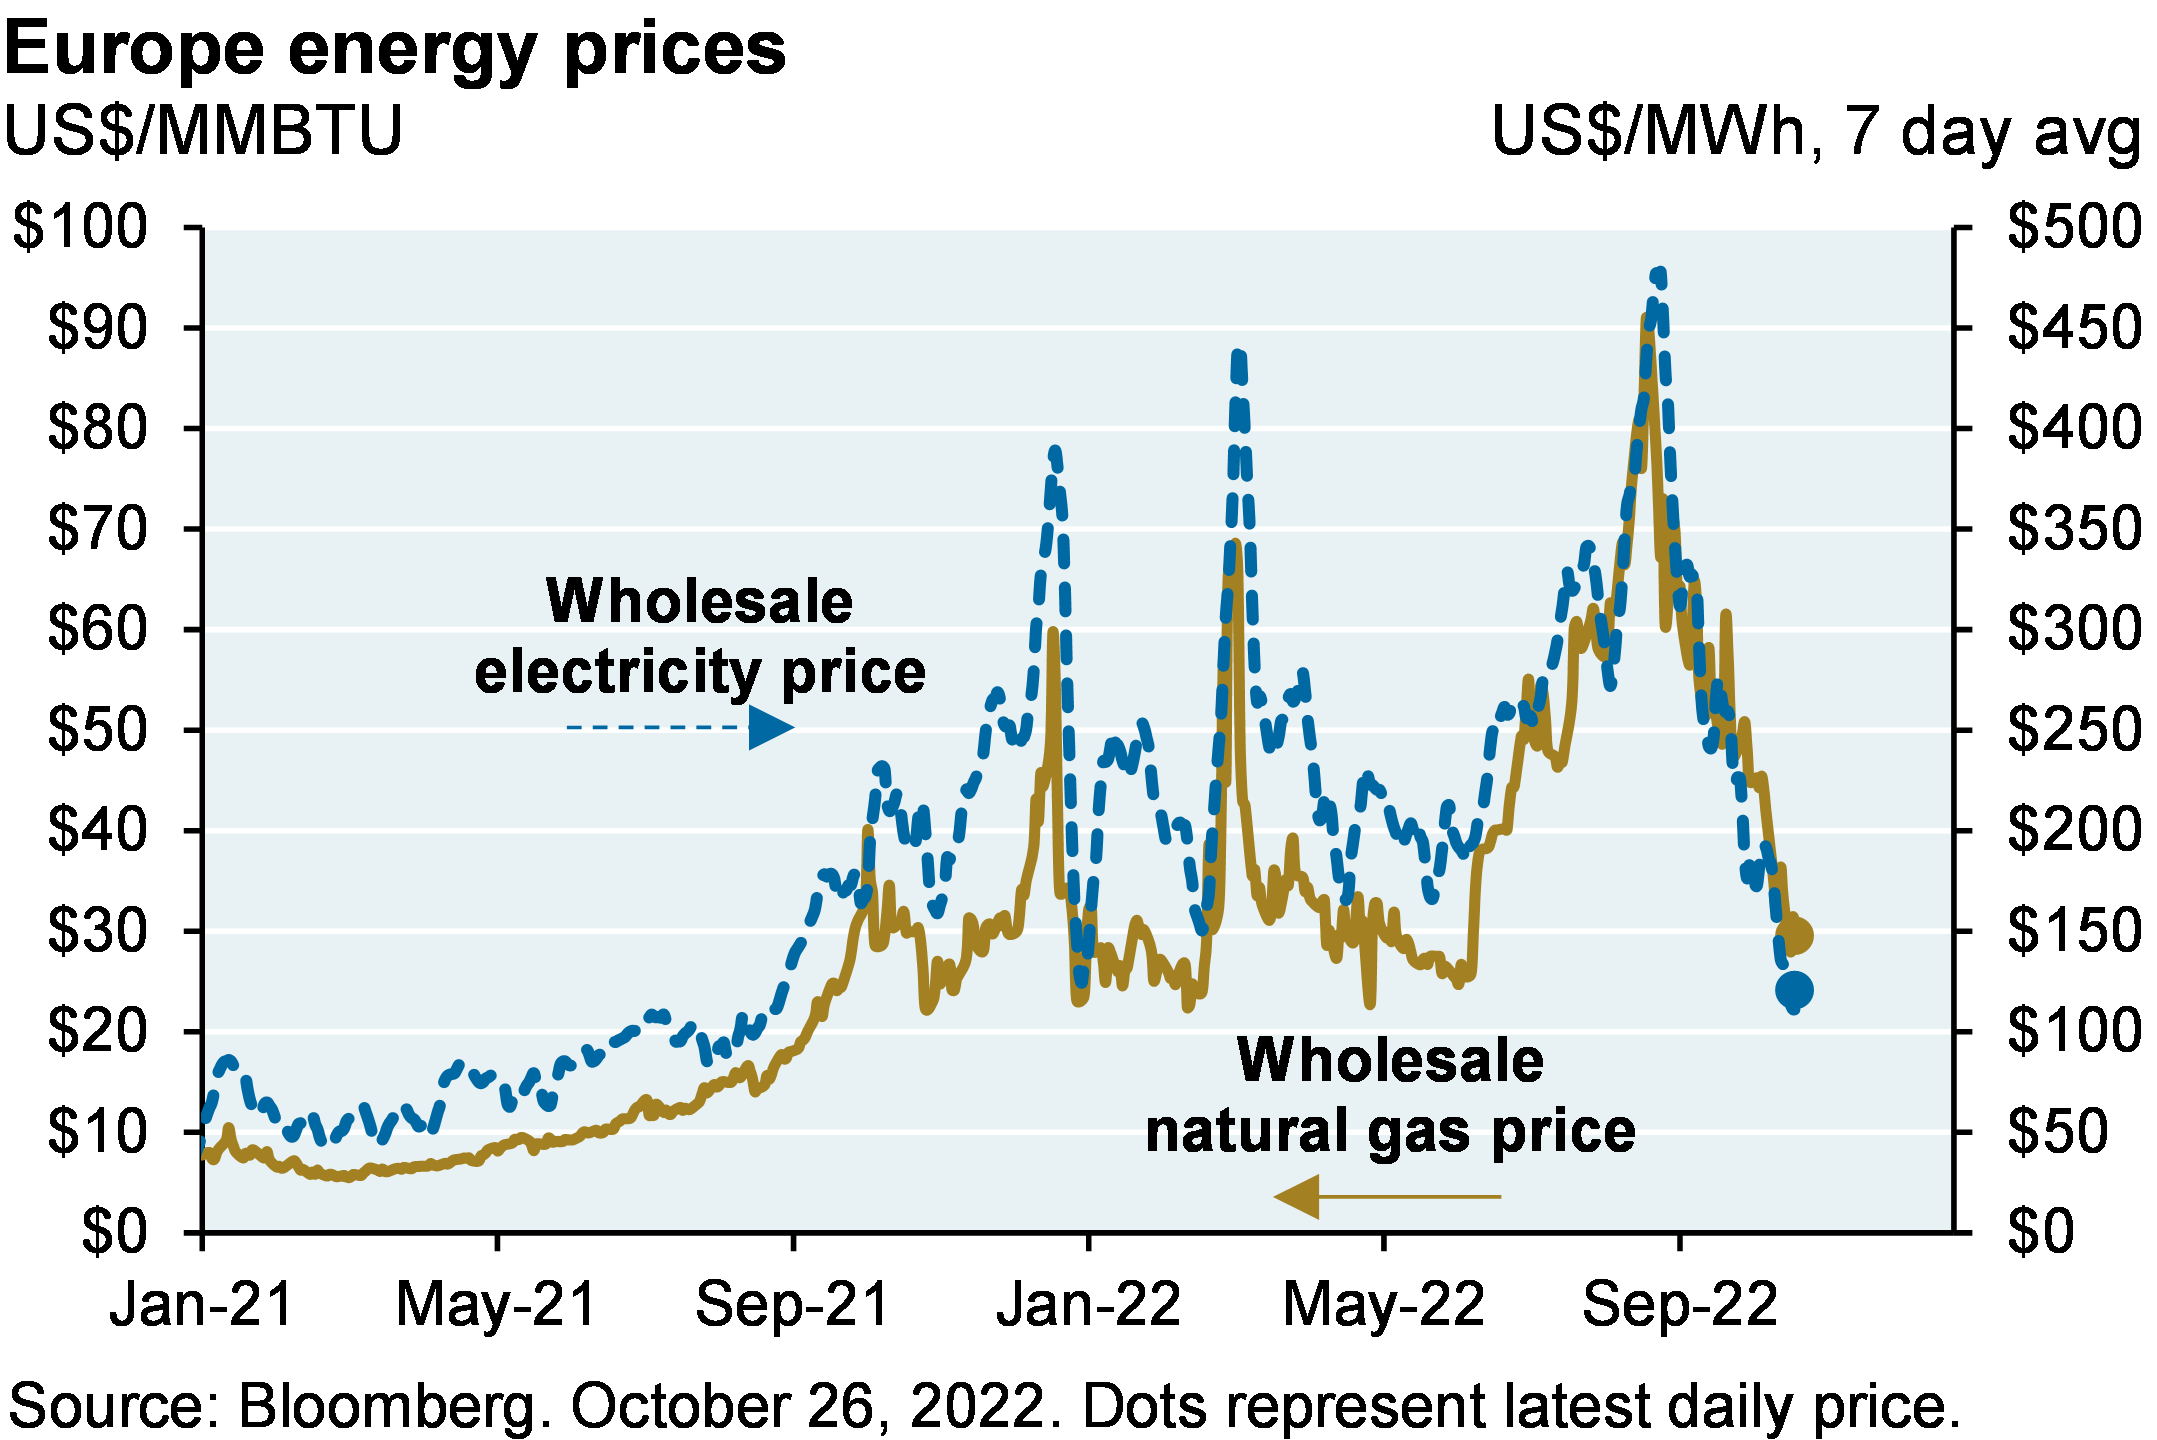 Line chart compares European wholesale electricity prices to European wholesale natural gas prices from January 2021 through the present. Both prices surged to a new high in the summer of 2022 and have since declined, but still remain 2-3x higher than they were in January 2021.